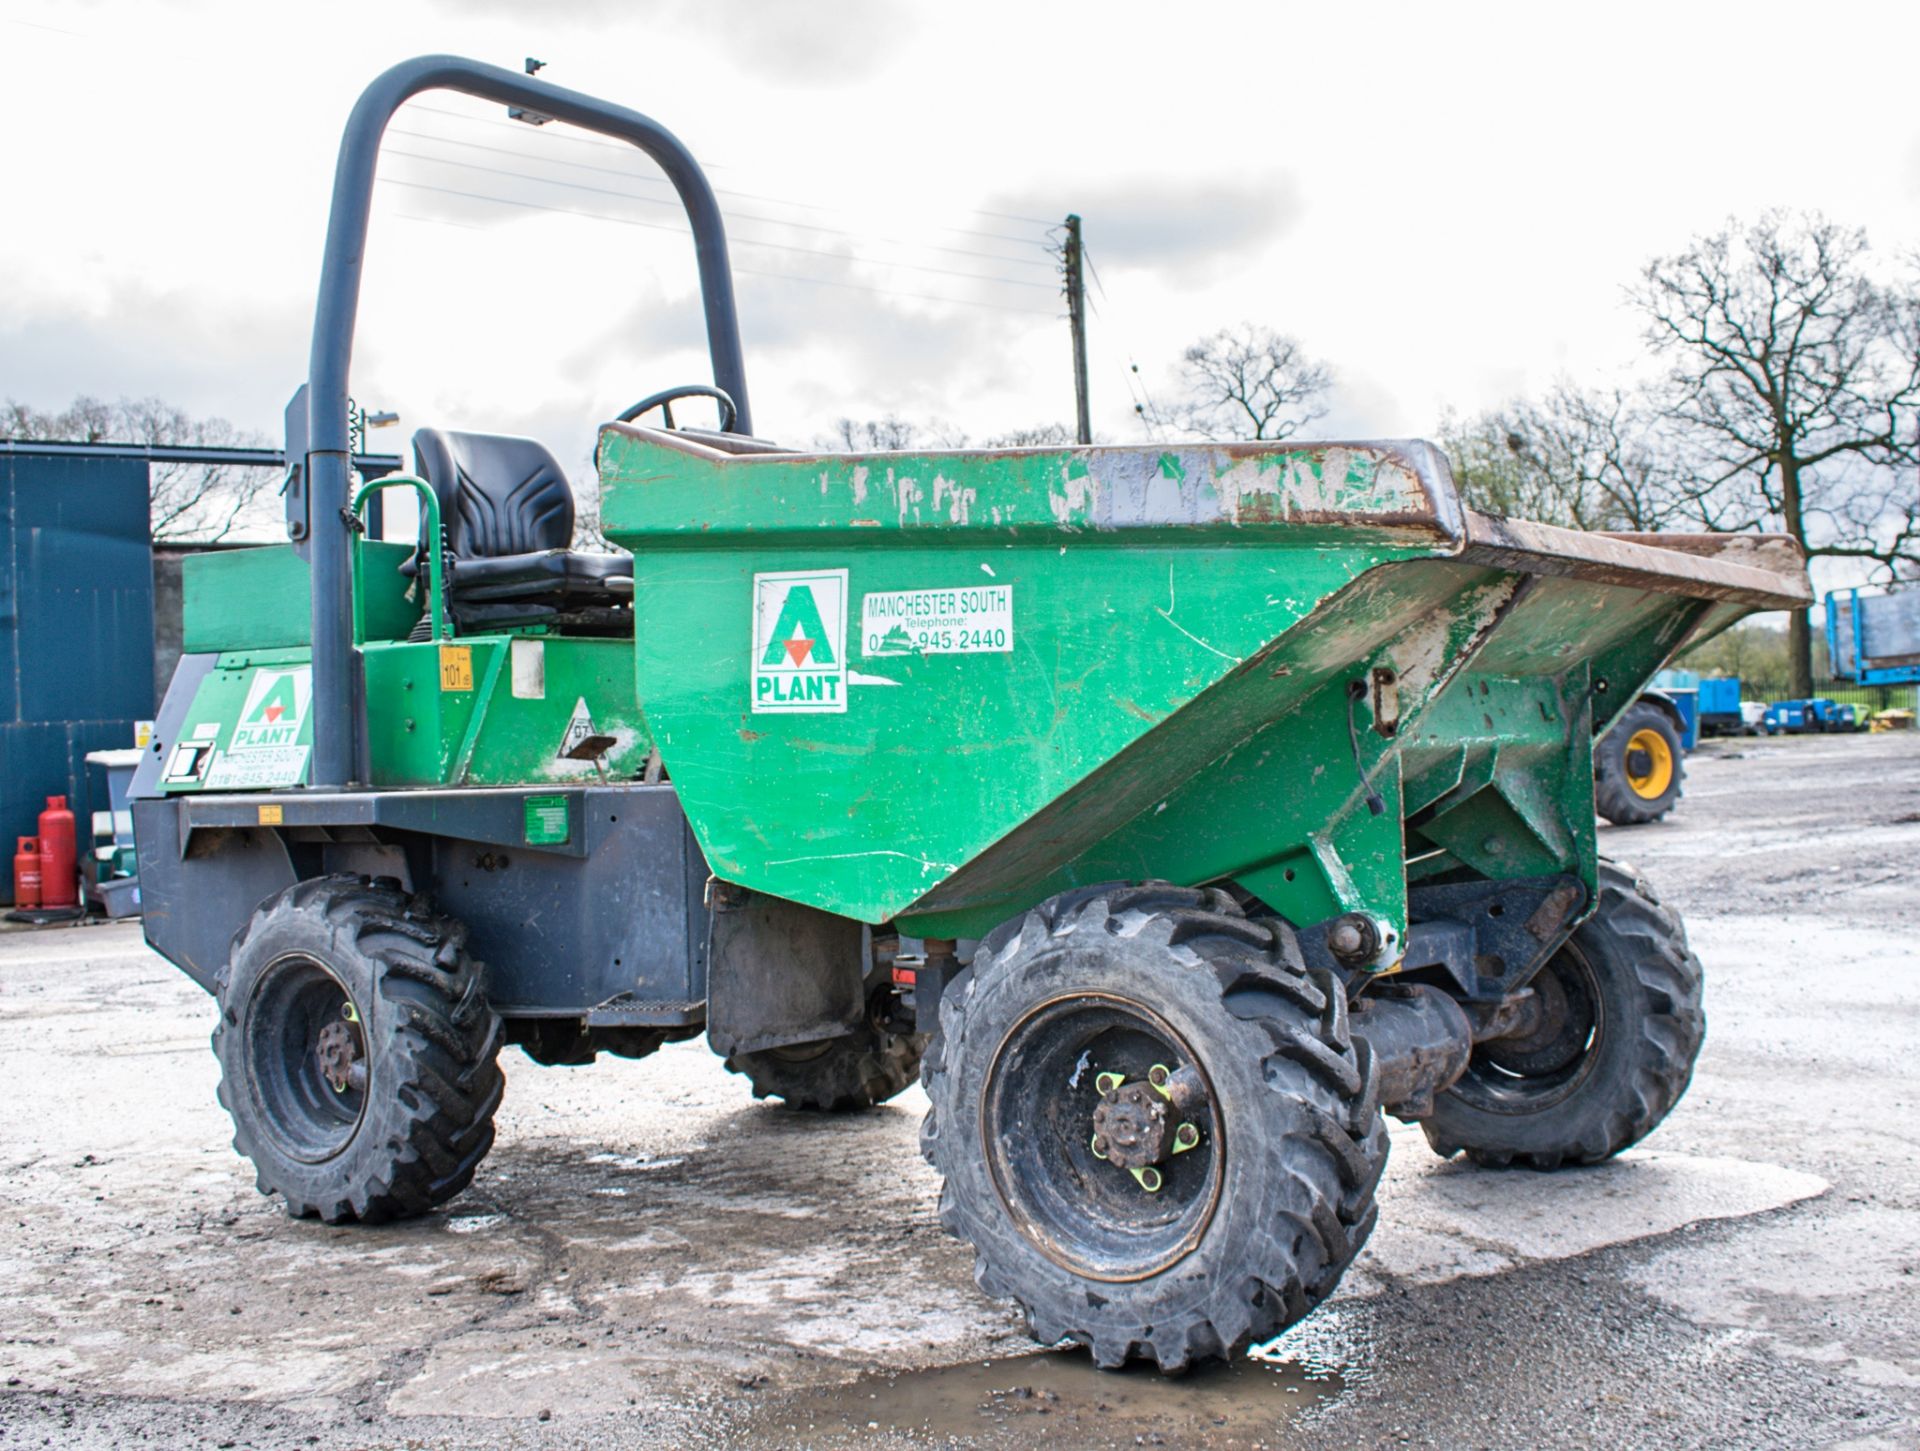 Benford Terex 2 tonne straight skip dumper Year: 2007 S/N: E703FN014 Recorded Hours: 1474 A444388 - Image 2 of 14